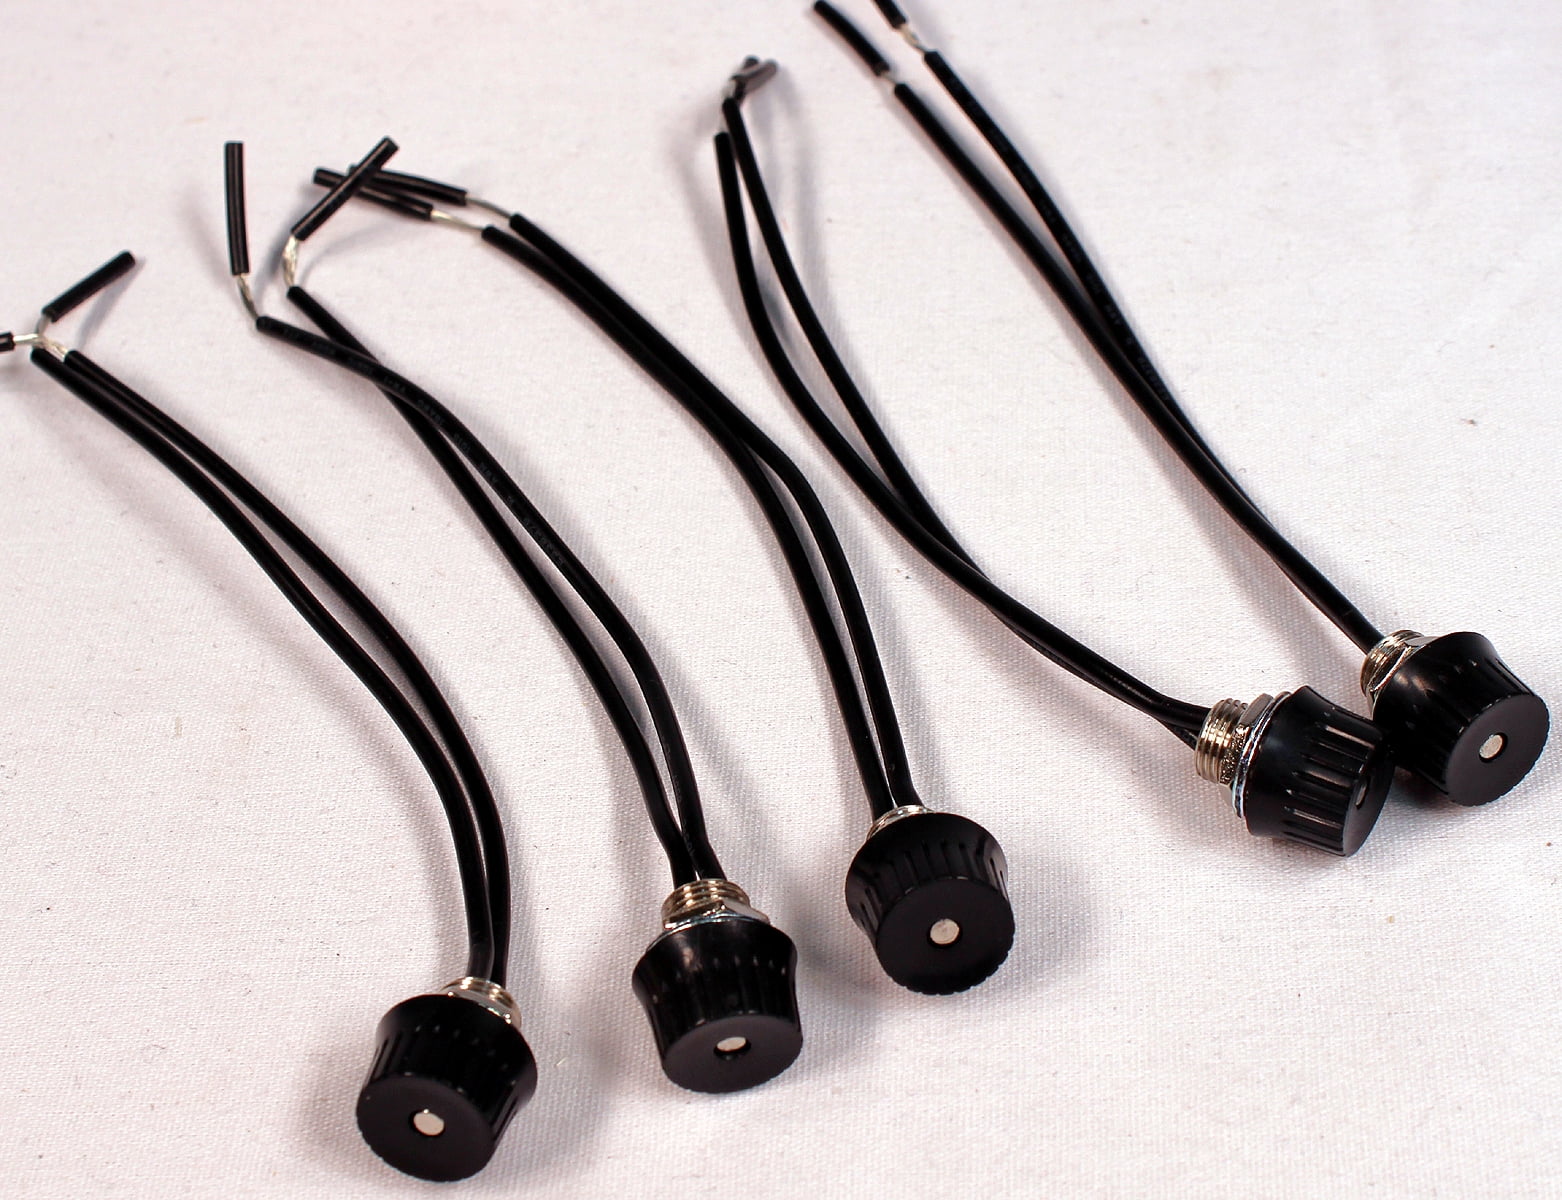 5 Pack of Rotary Stye On/Off Canopy Switches 3/1 amps at 125/250 6" Wires 